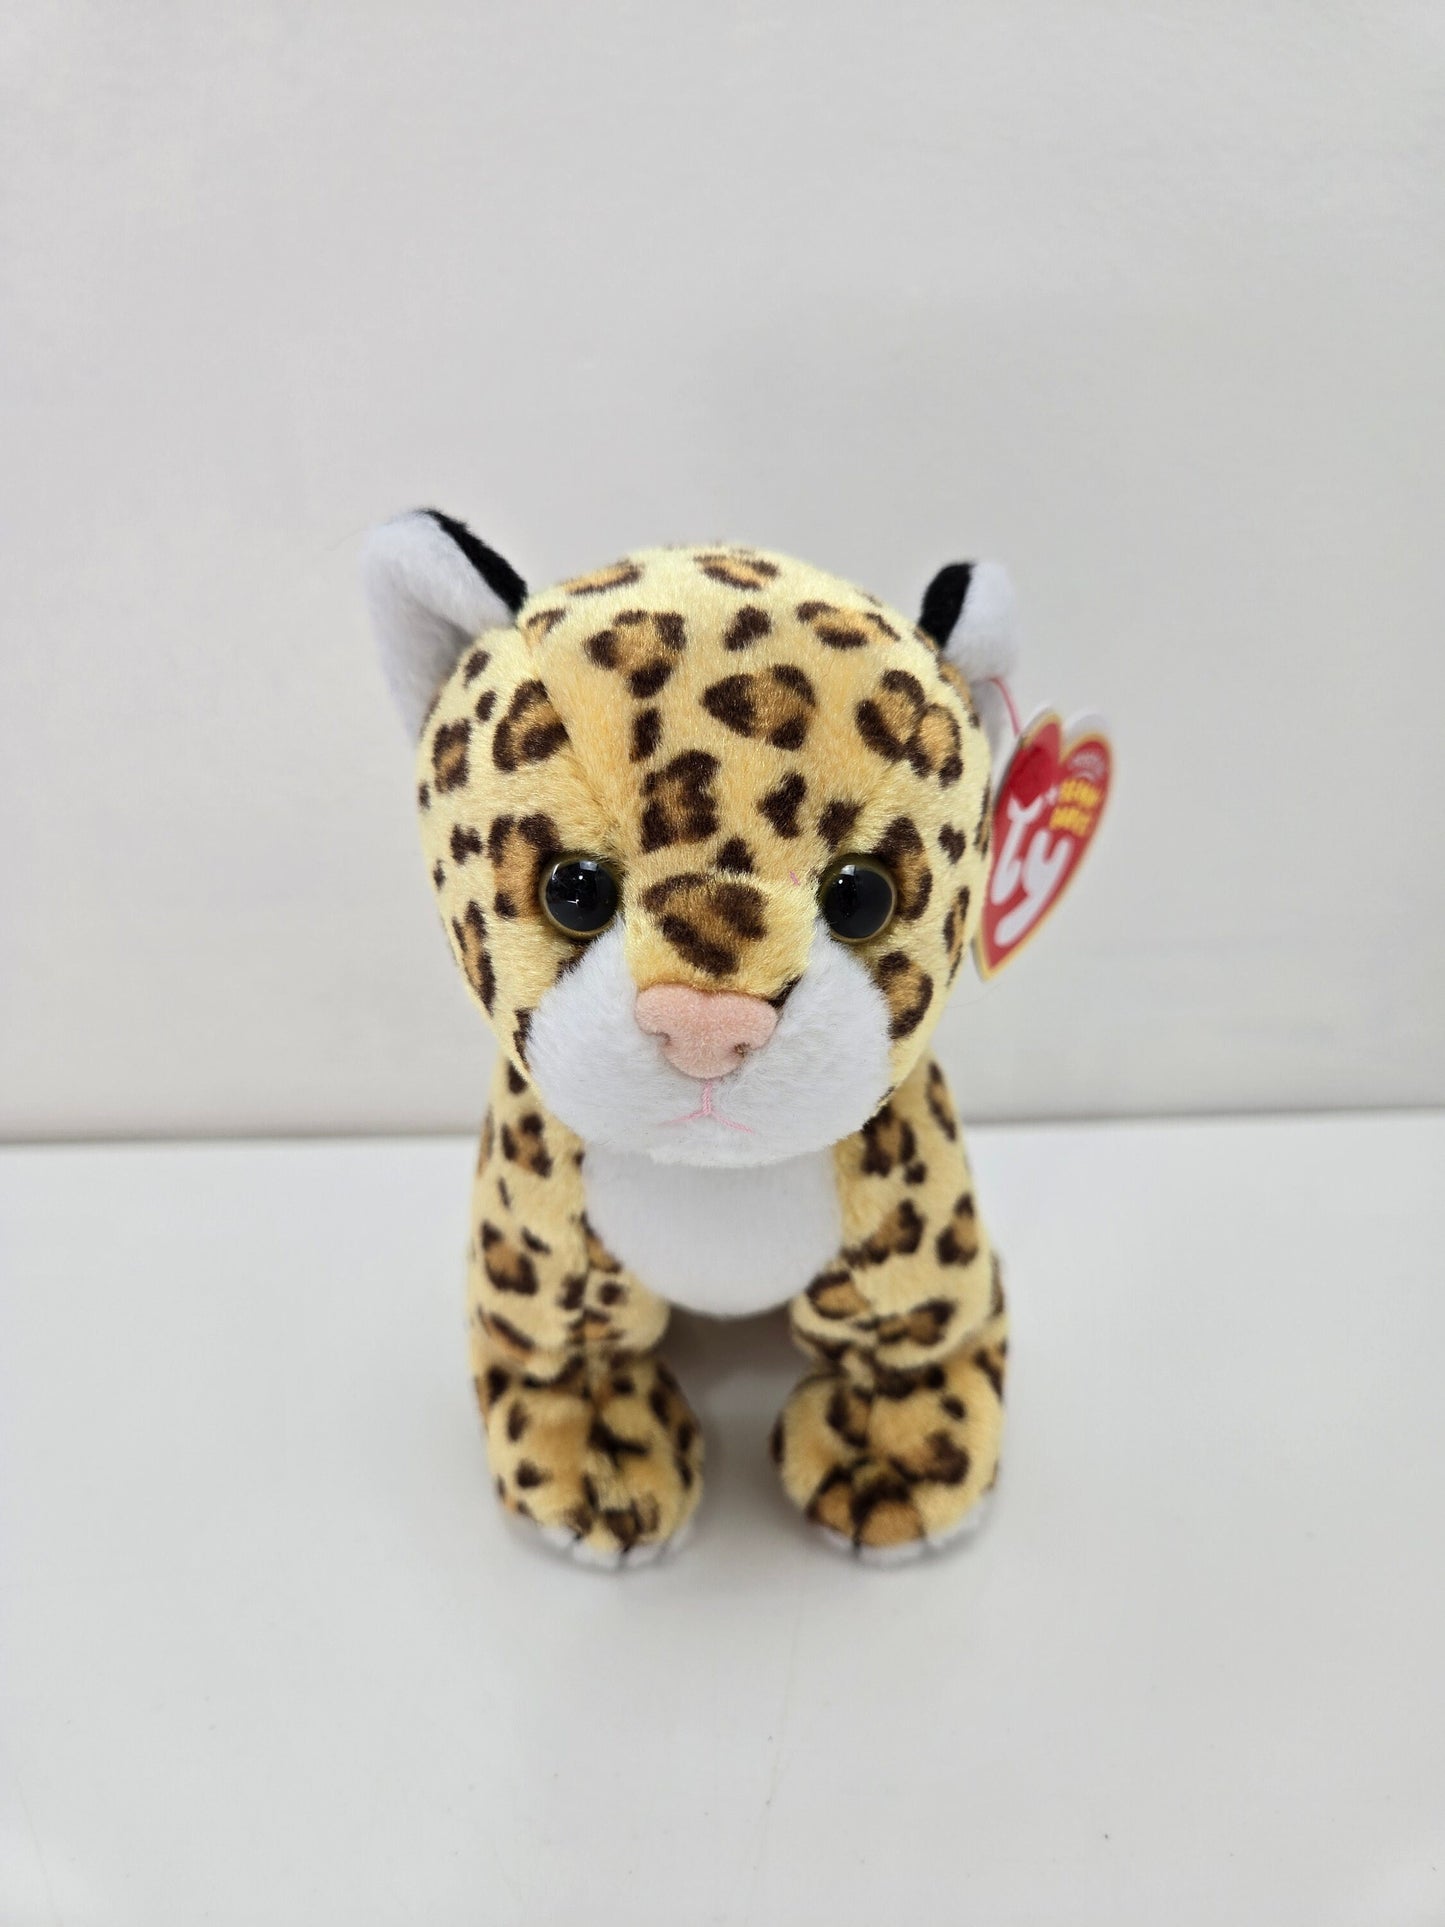 Ty Beanie Baby “Leelo” the Leopard! (6 inch)